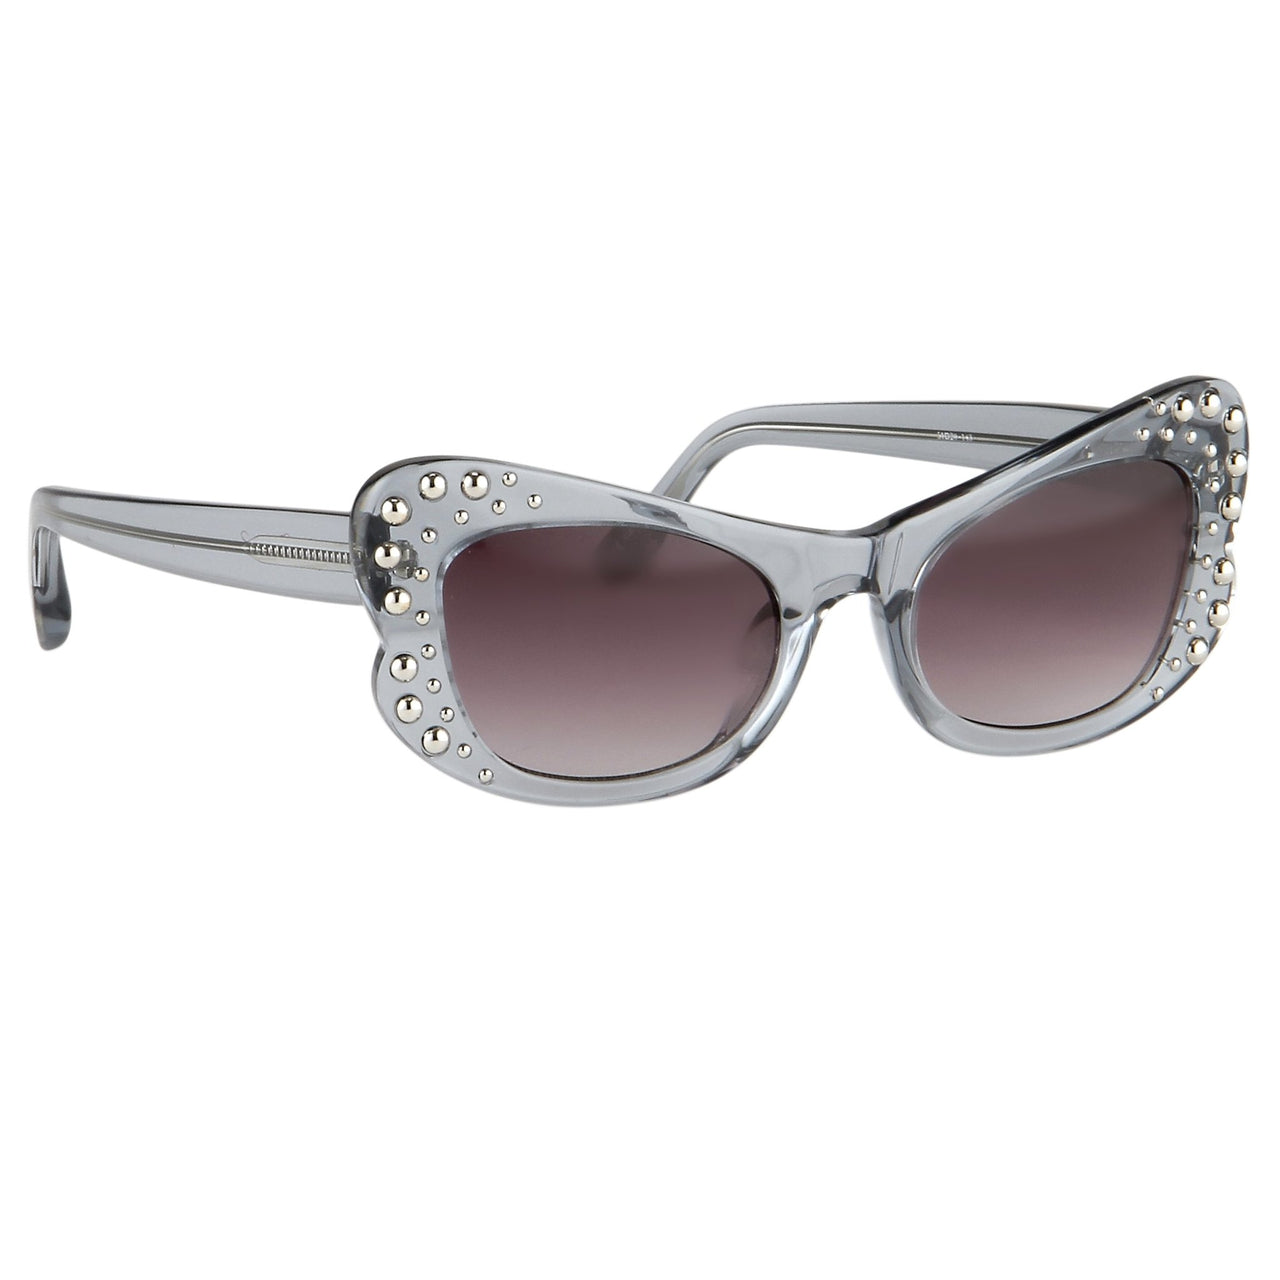 Agent Provocateur Women Sunglasses Butterfly Blue and Grey Lenses Category 3 - AP56C13SUN - Watches & Crystals